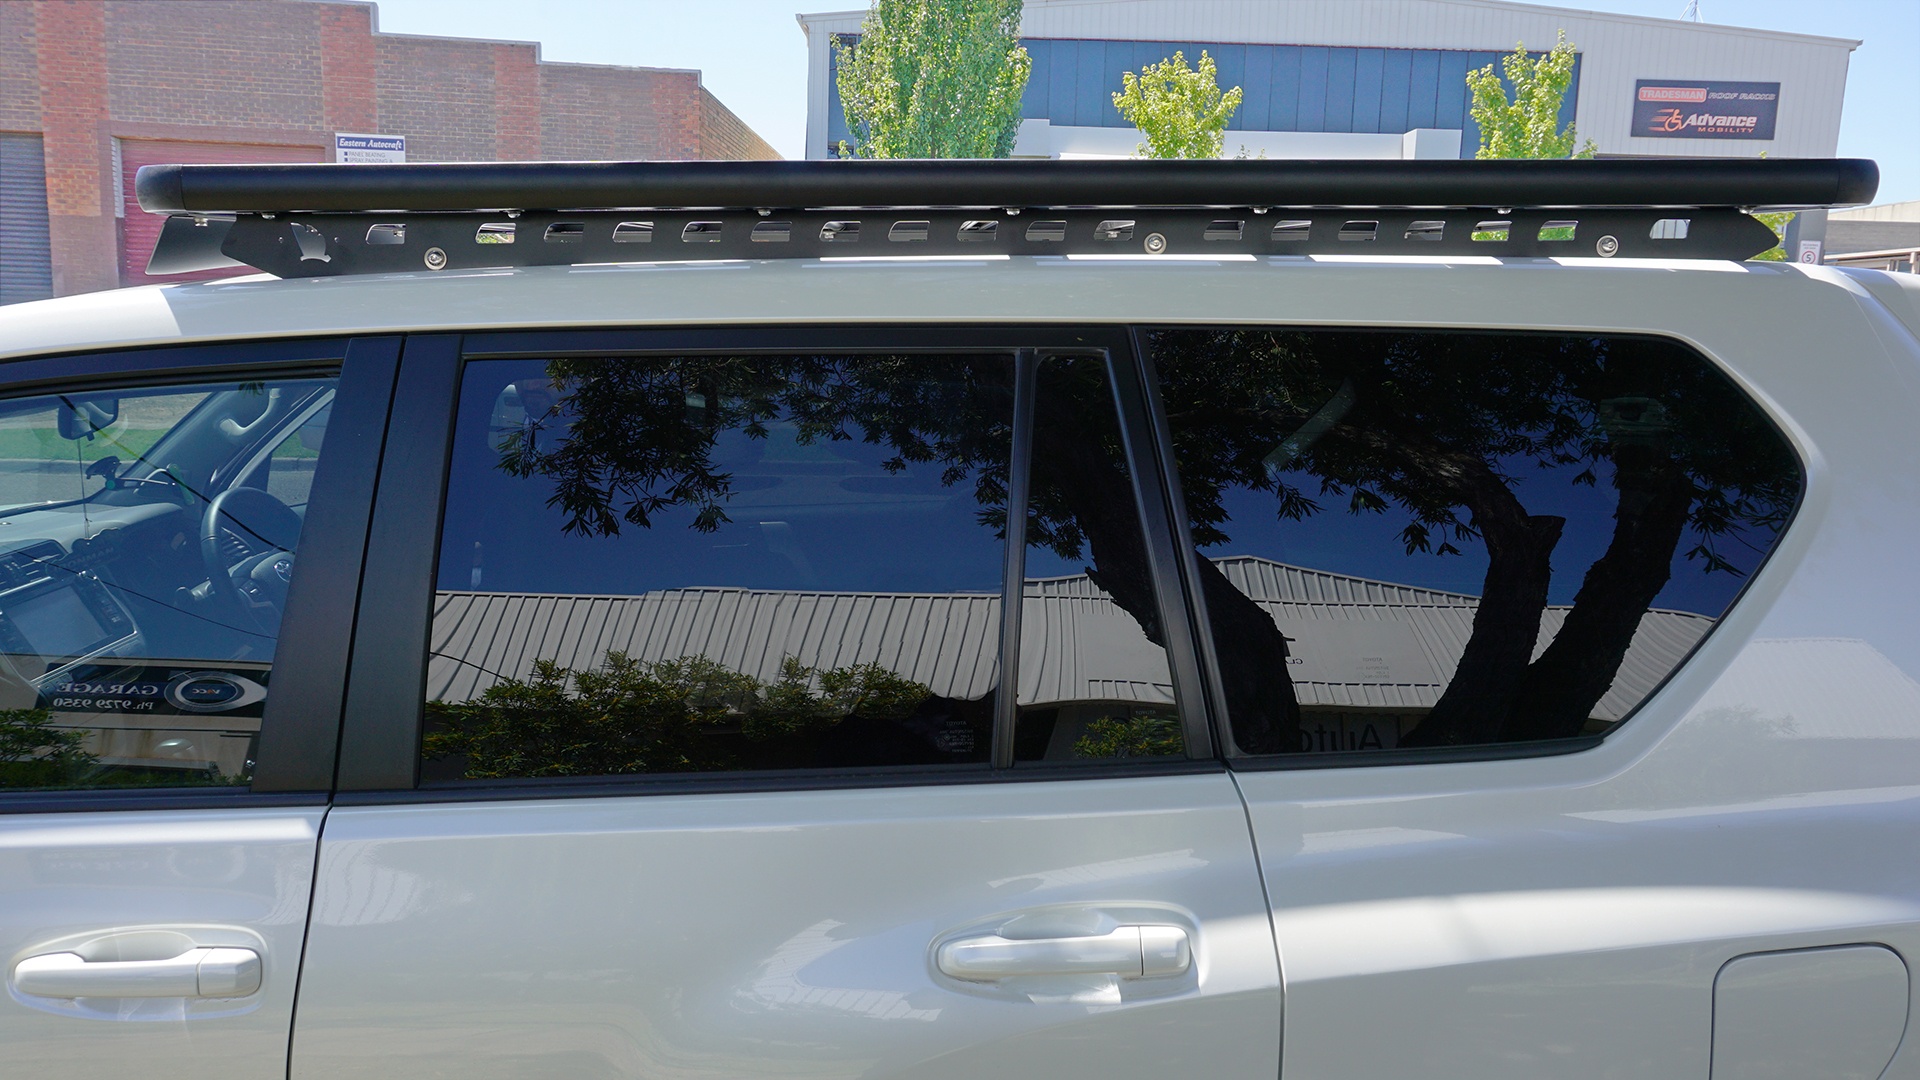 Toyota Prado 150 Series with a Wedgetail roof rack installed.